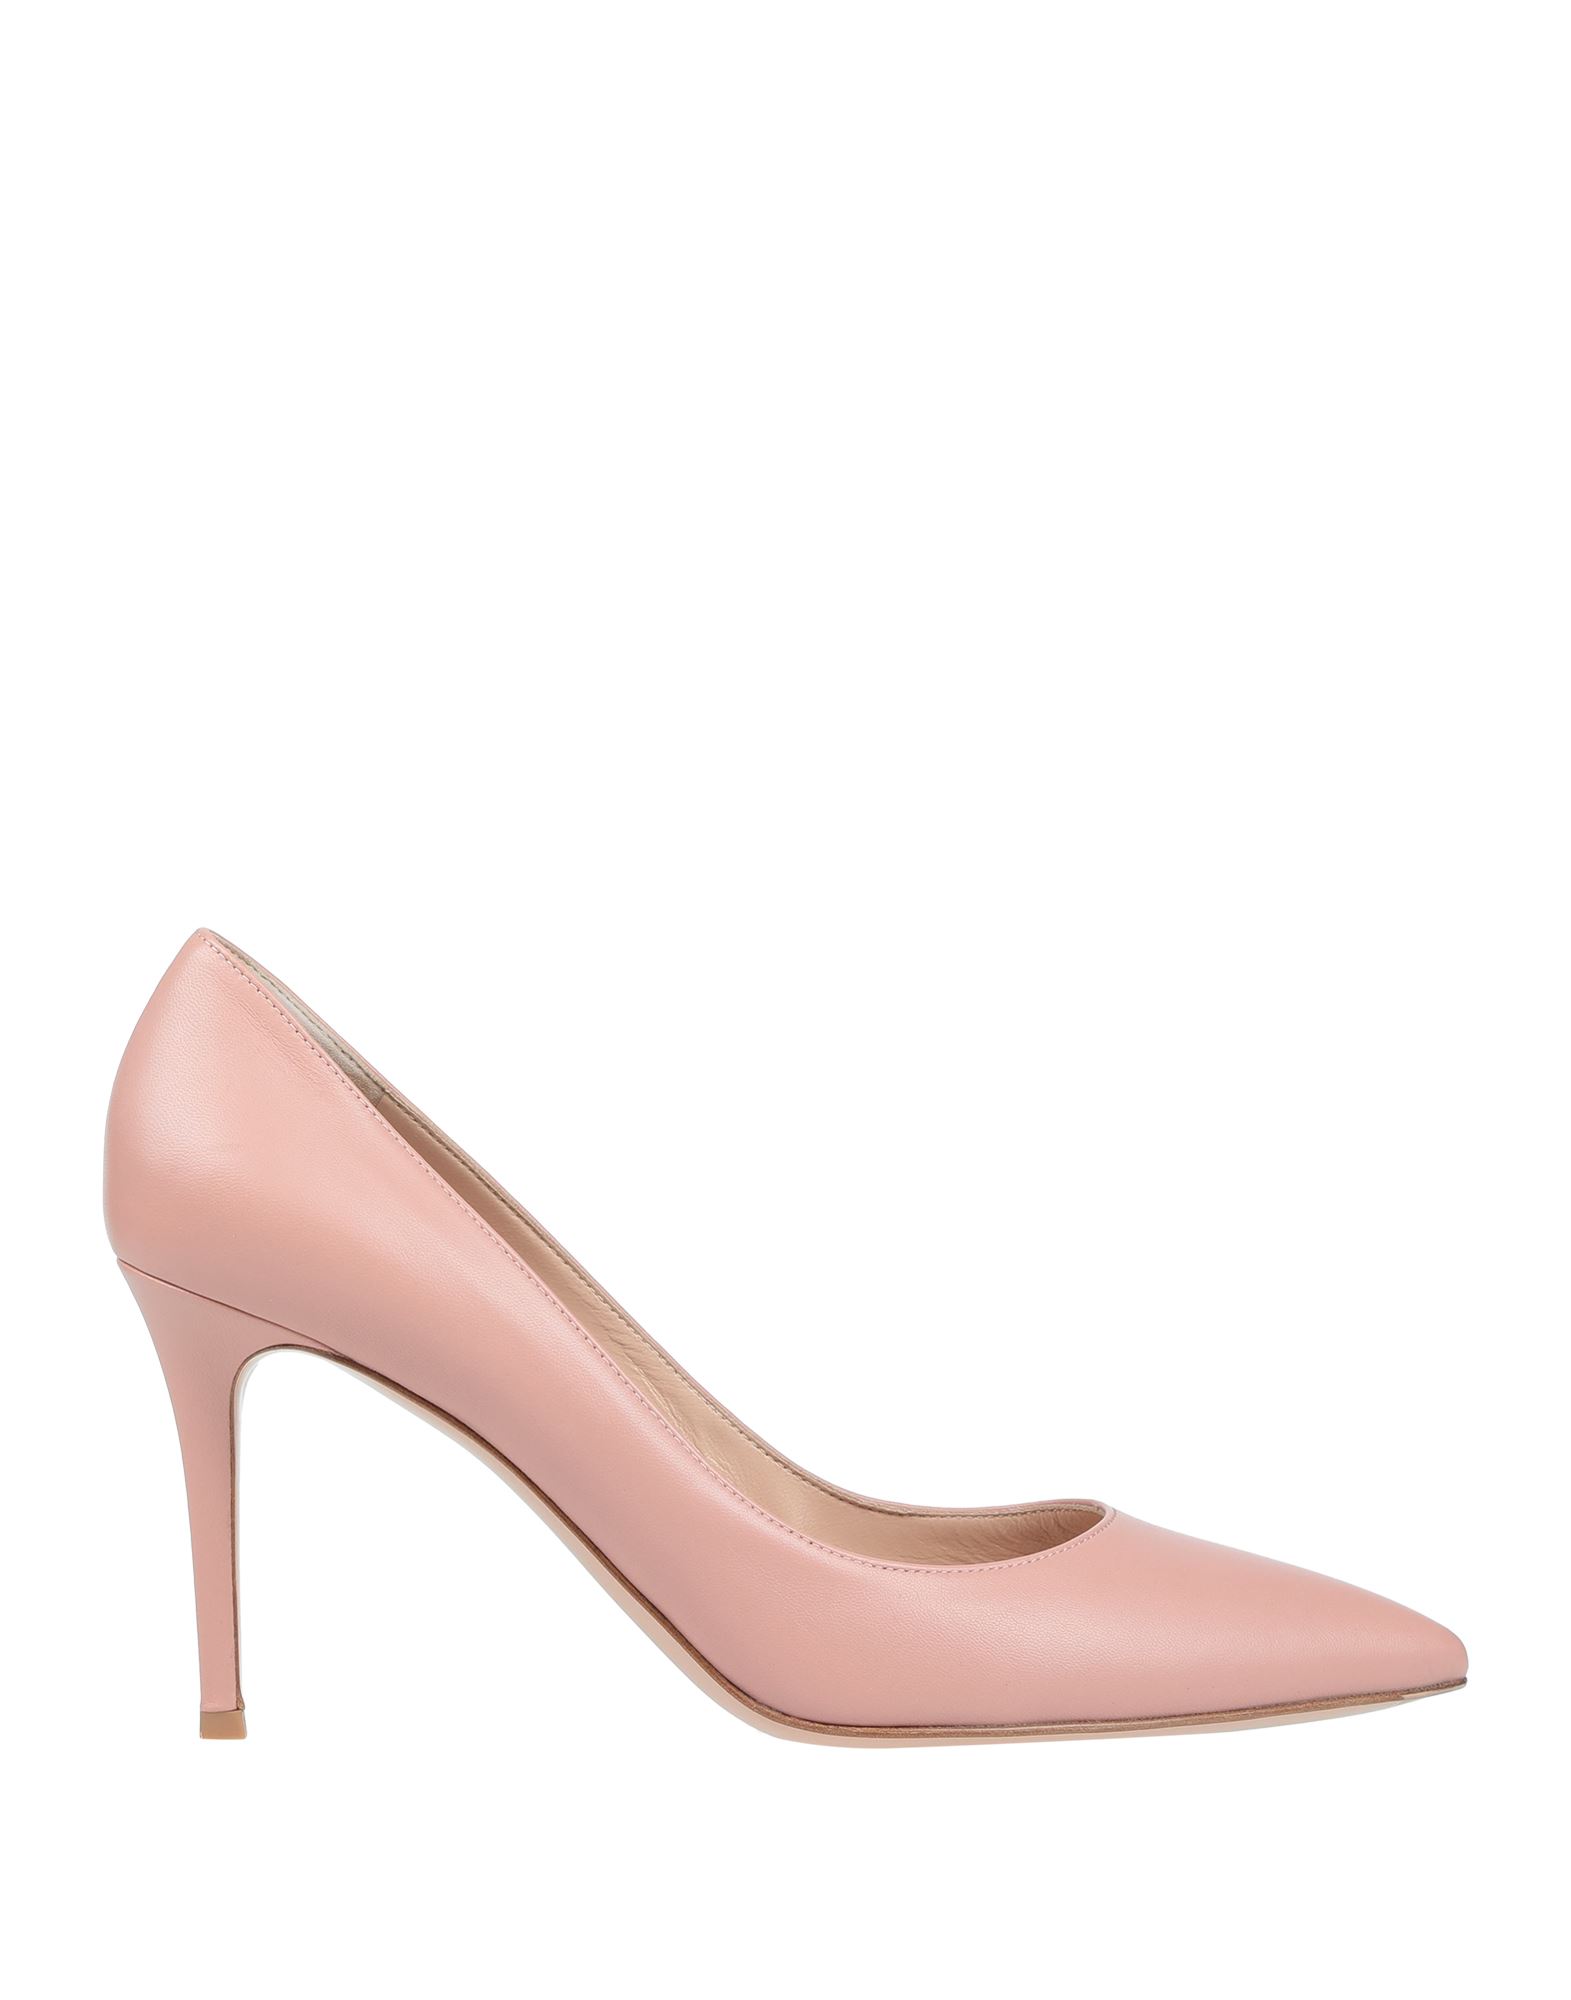 Gianvito Rossi Pumps In Pink